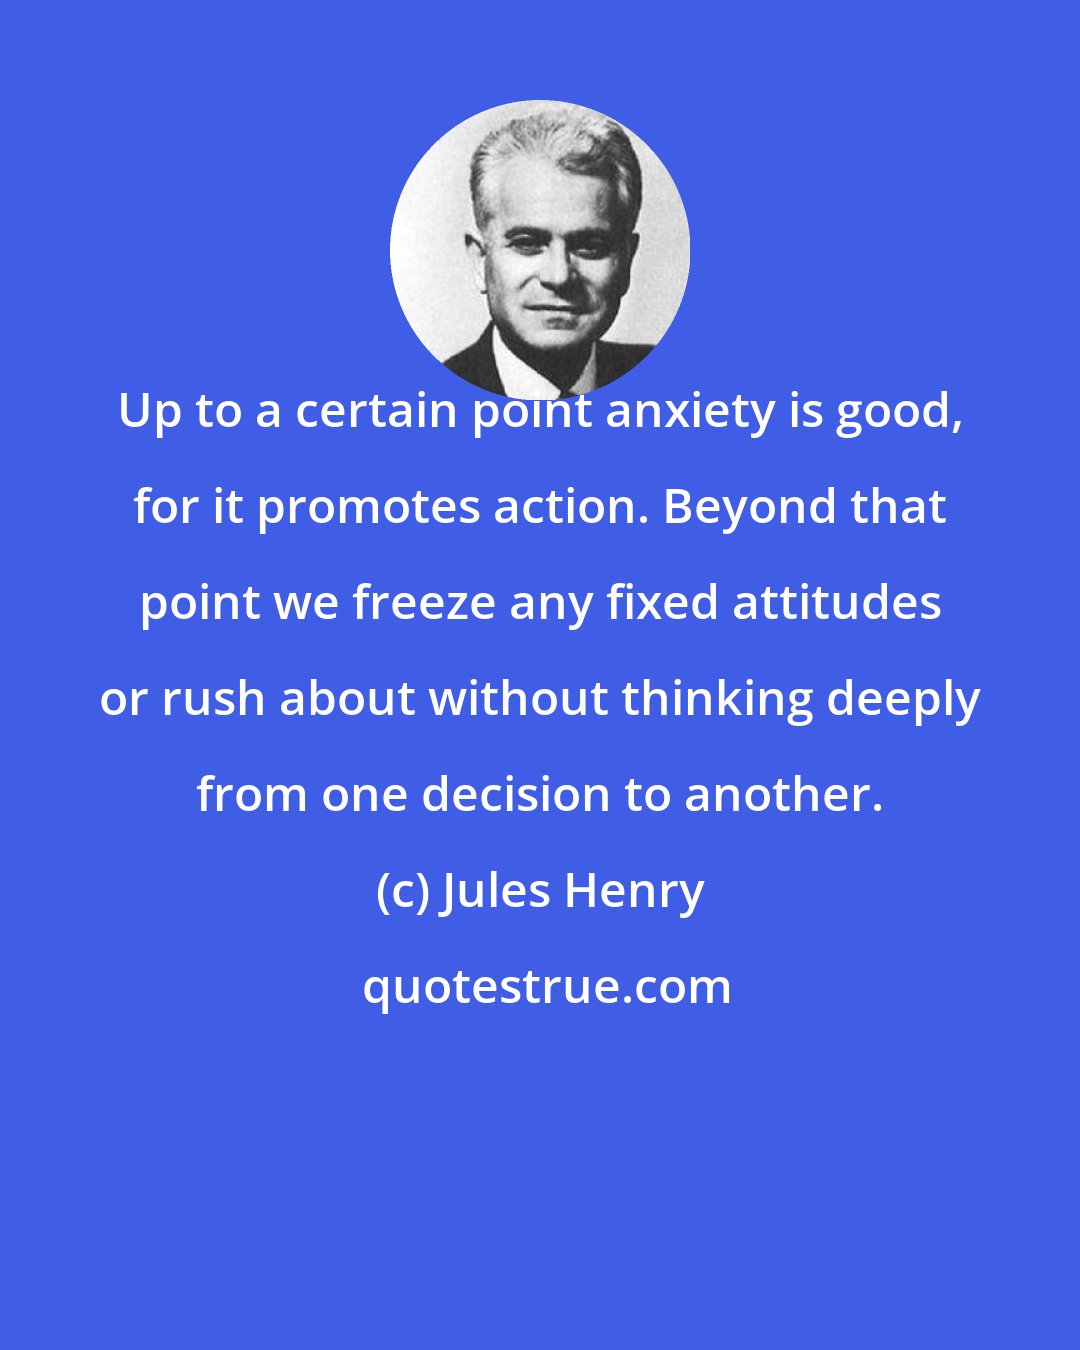 Jules Henry: Up to a certain point anxiety is good, for it promotes action. Beyond that point we freeze any fixed attitudes or rush about without thinking deeply from one decision to another.